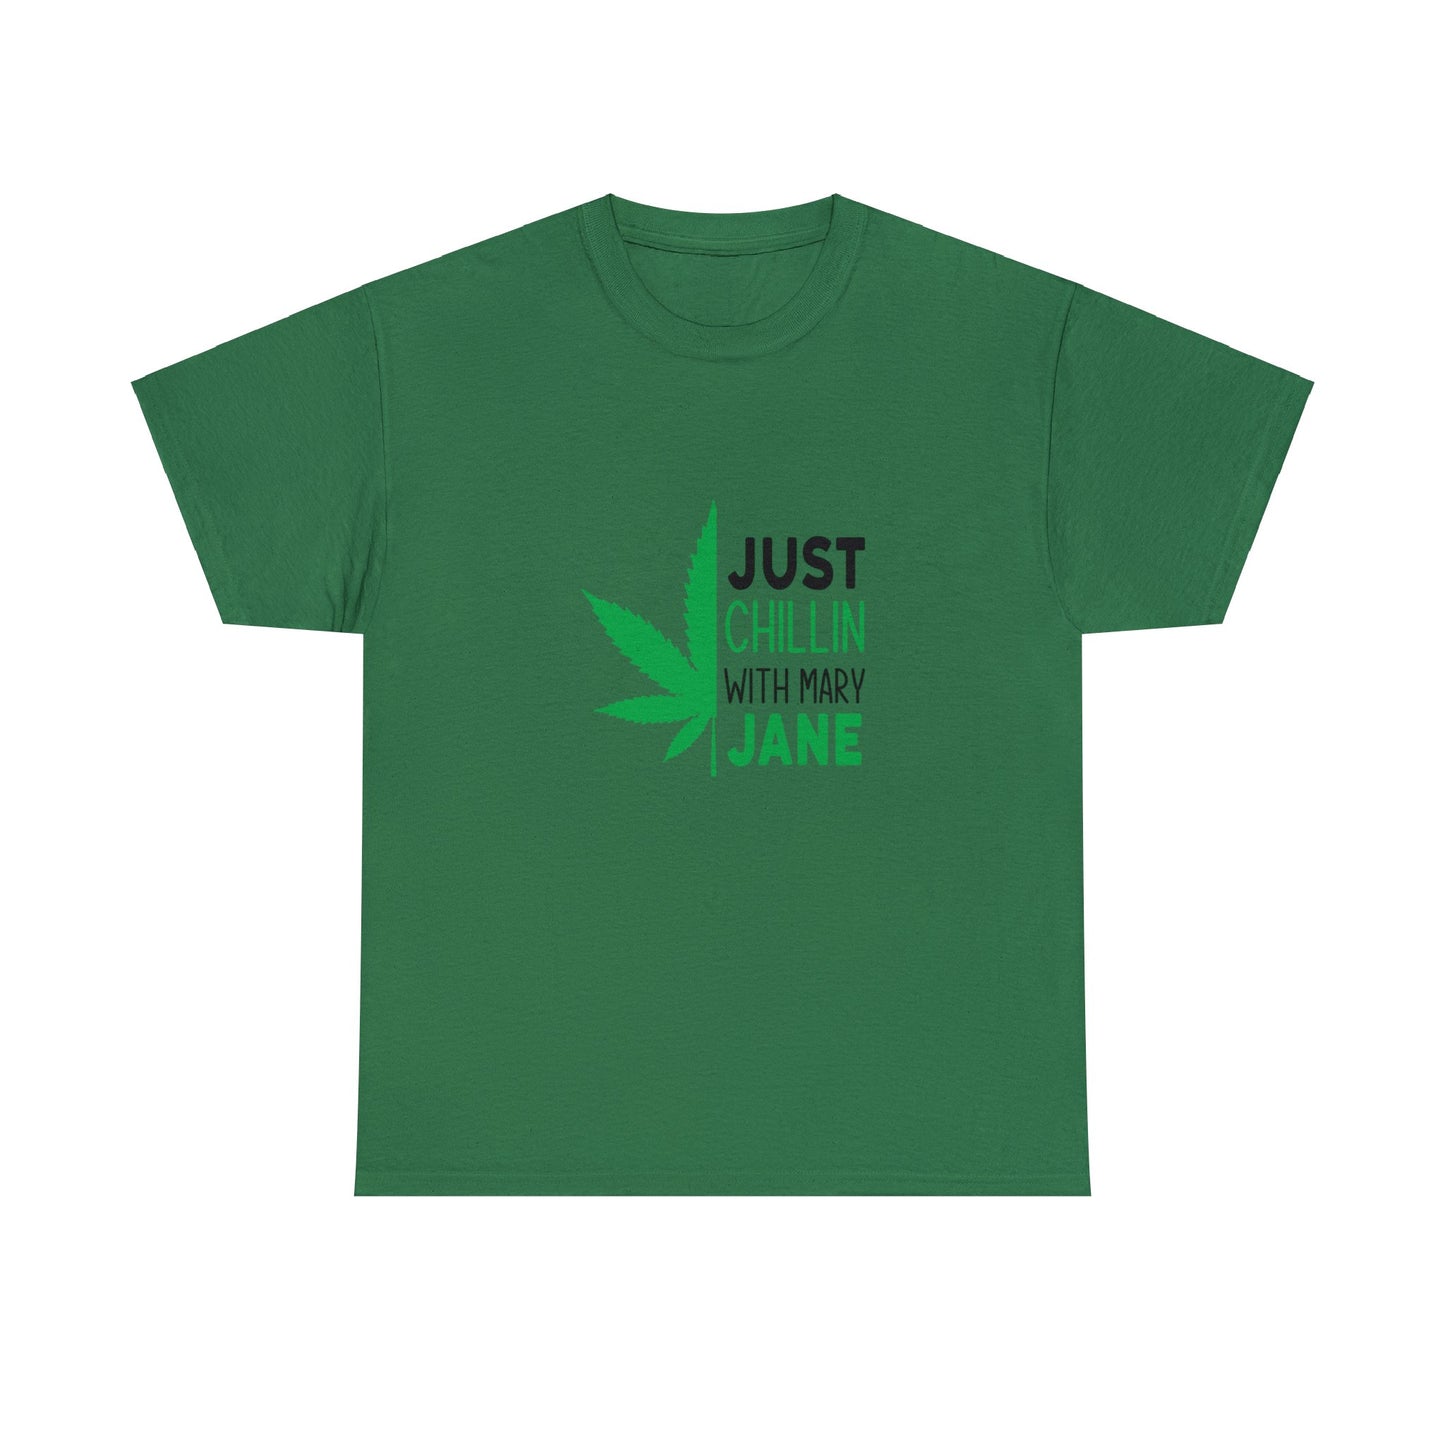 Just Chilling With Mary Jane | Cotton Tee | Unisex Sizing